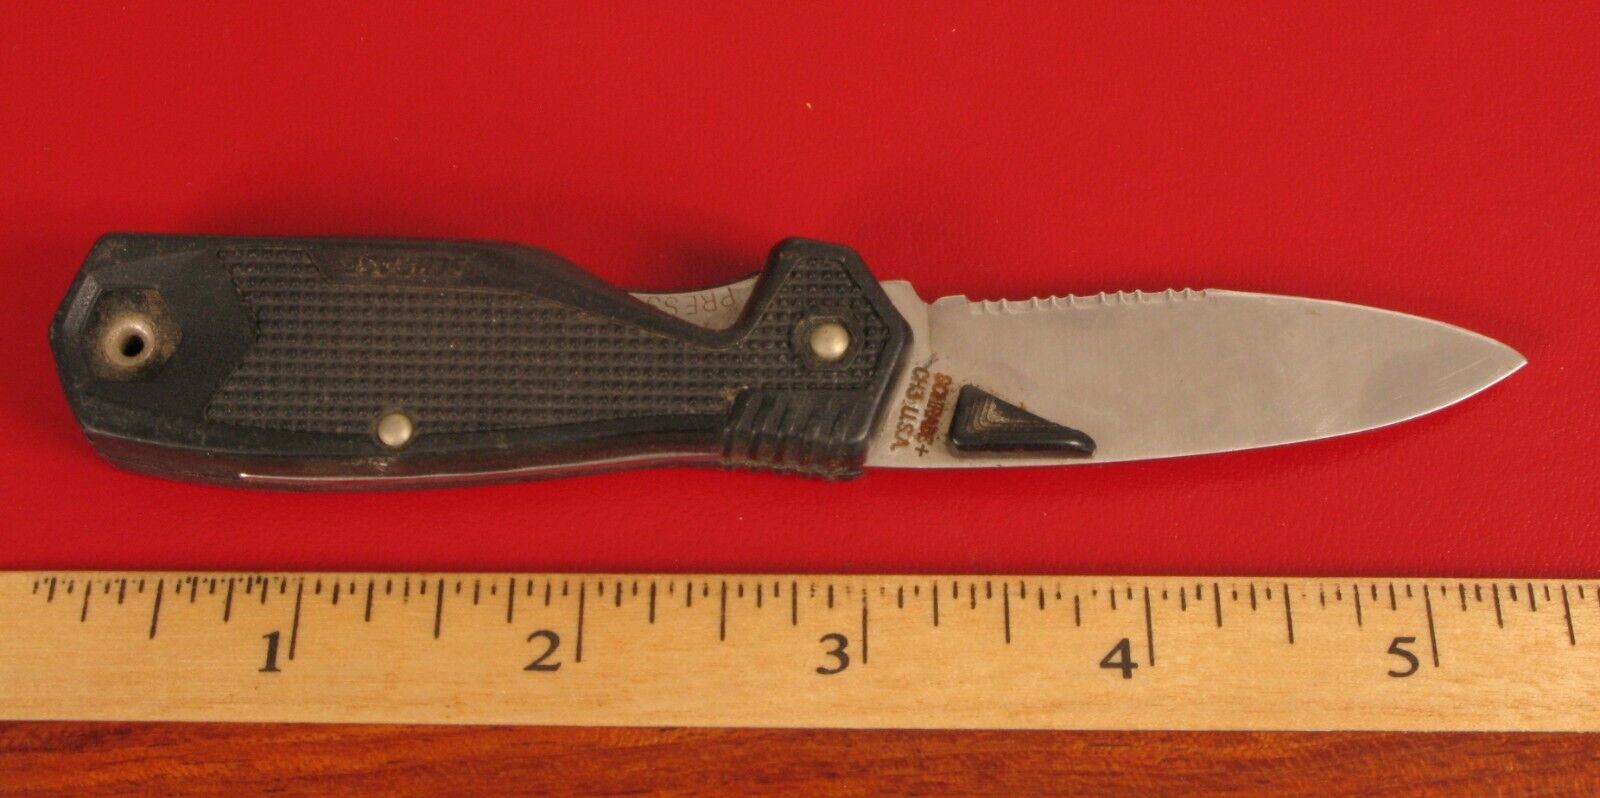 VINTAGE USED SCHRADE CH3 LOCK BLADE SERRATED POCKET KNIFE MADE IN USA 